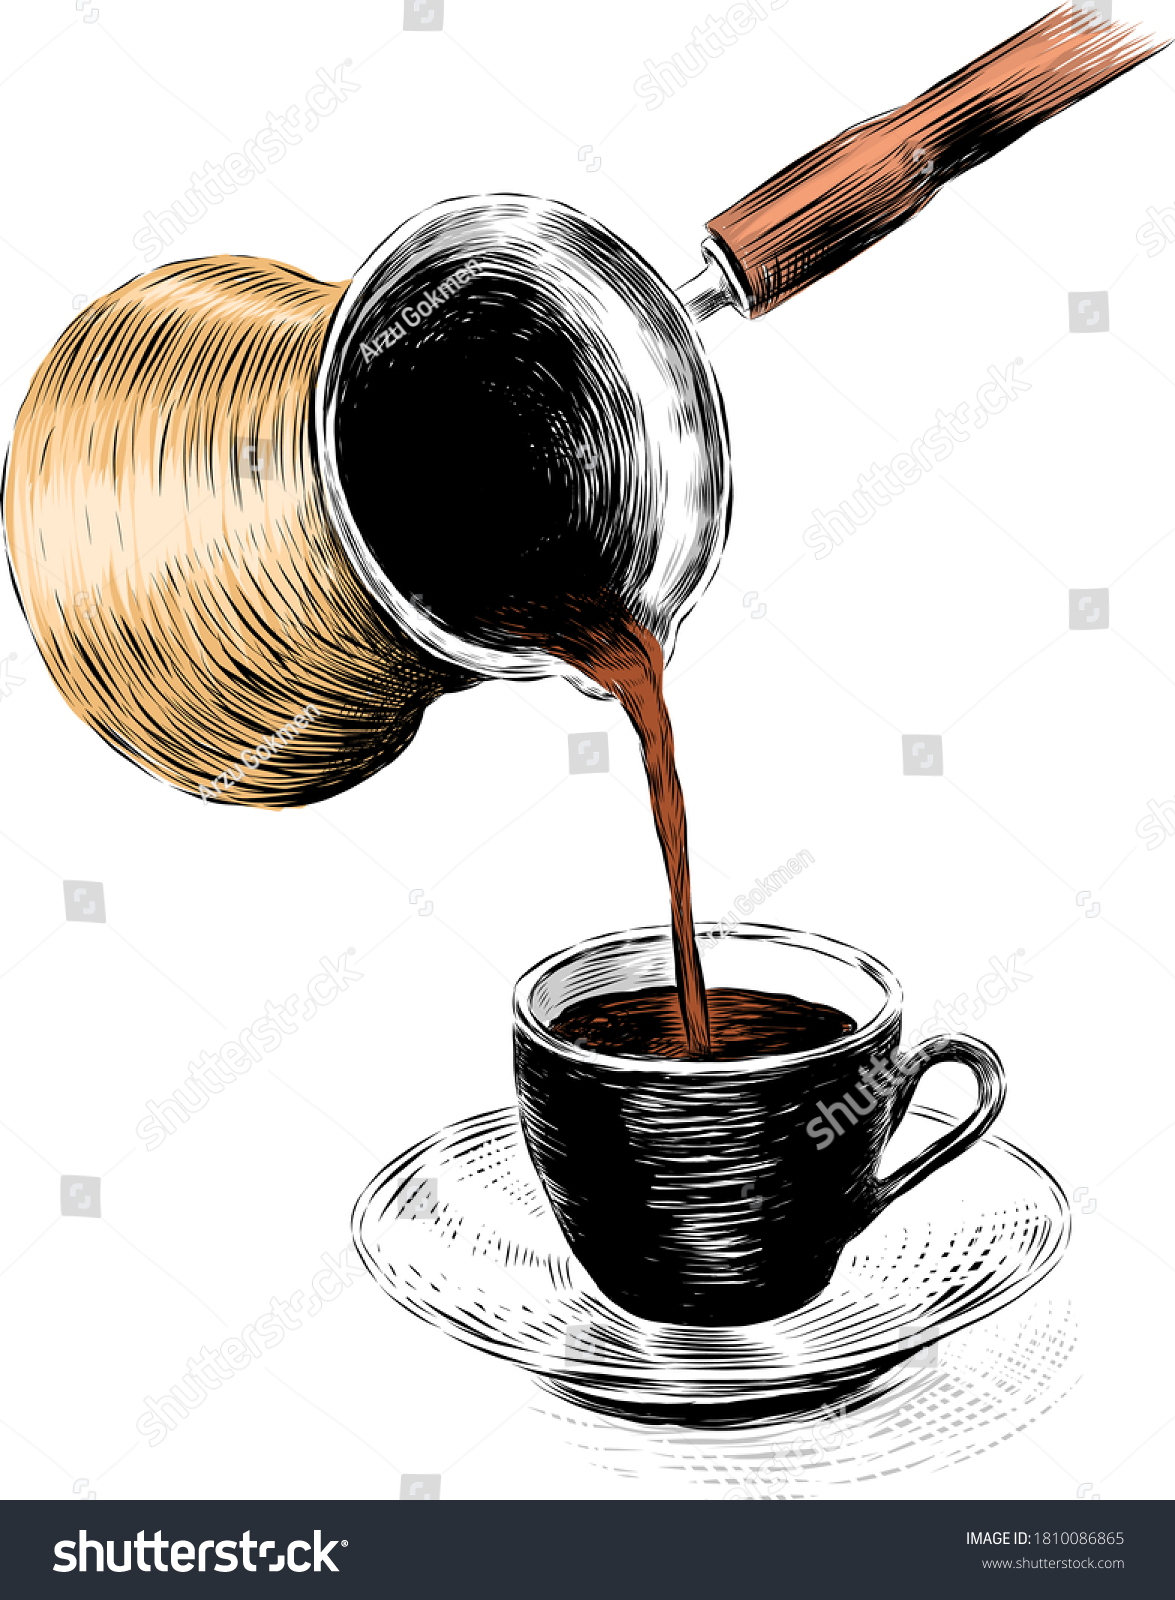 SVG of Hand drawn traditional Turkish coffee pot and cup vector illustration. Pouring Turkish Coffee from traditional pot into cup. svg